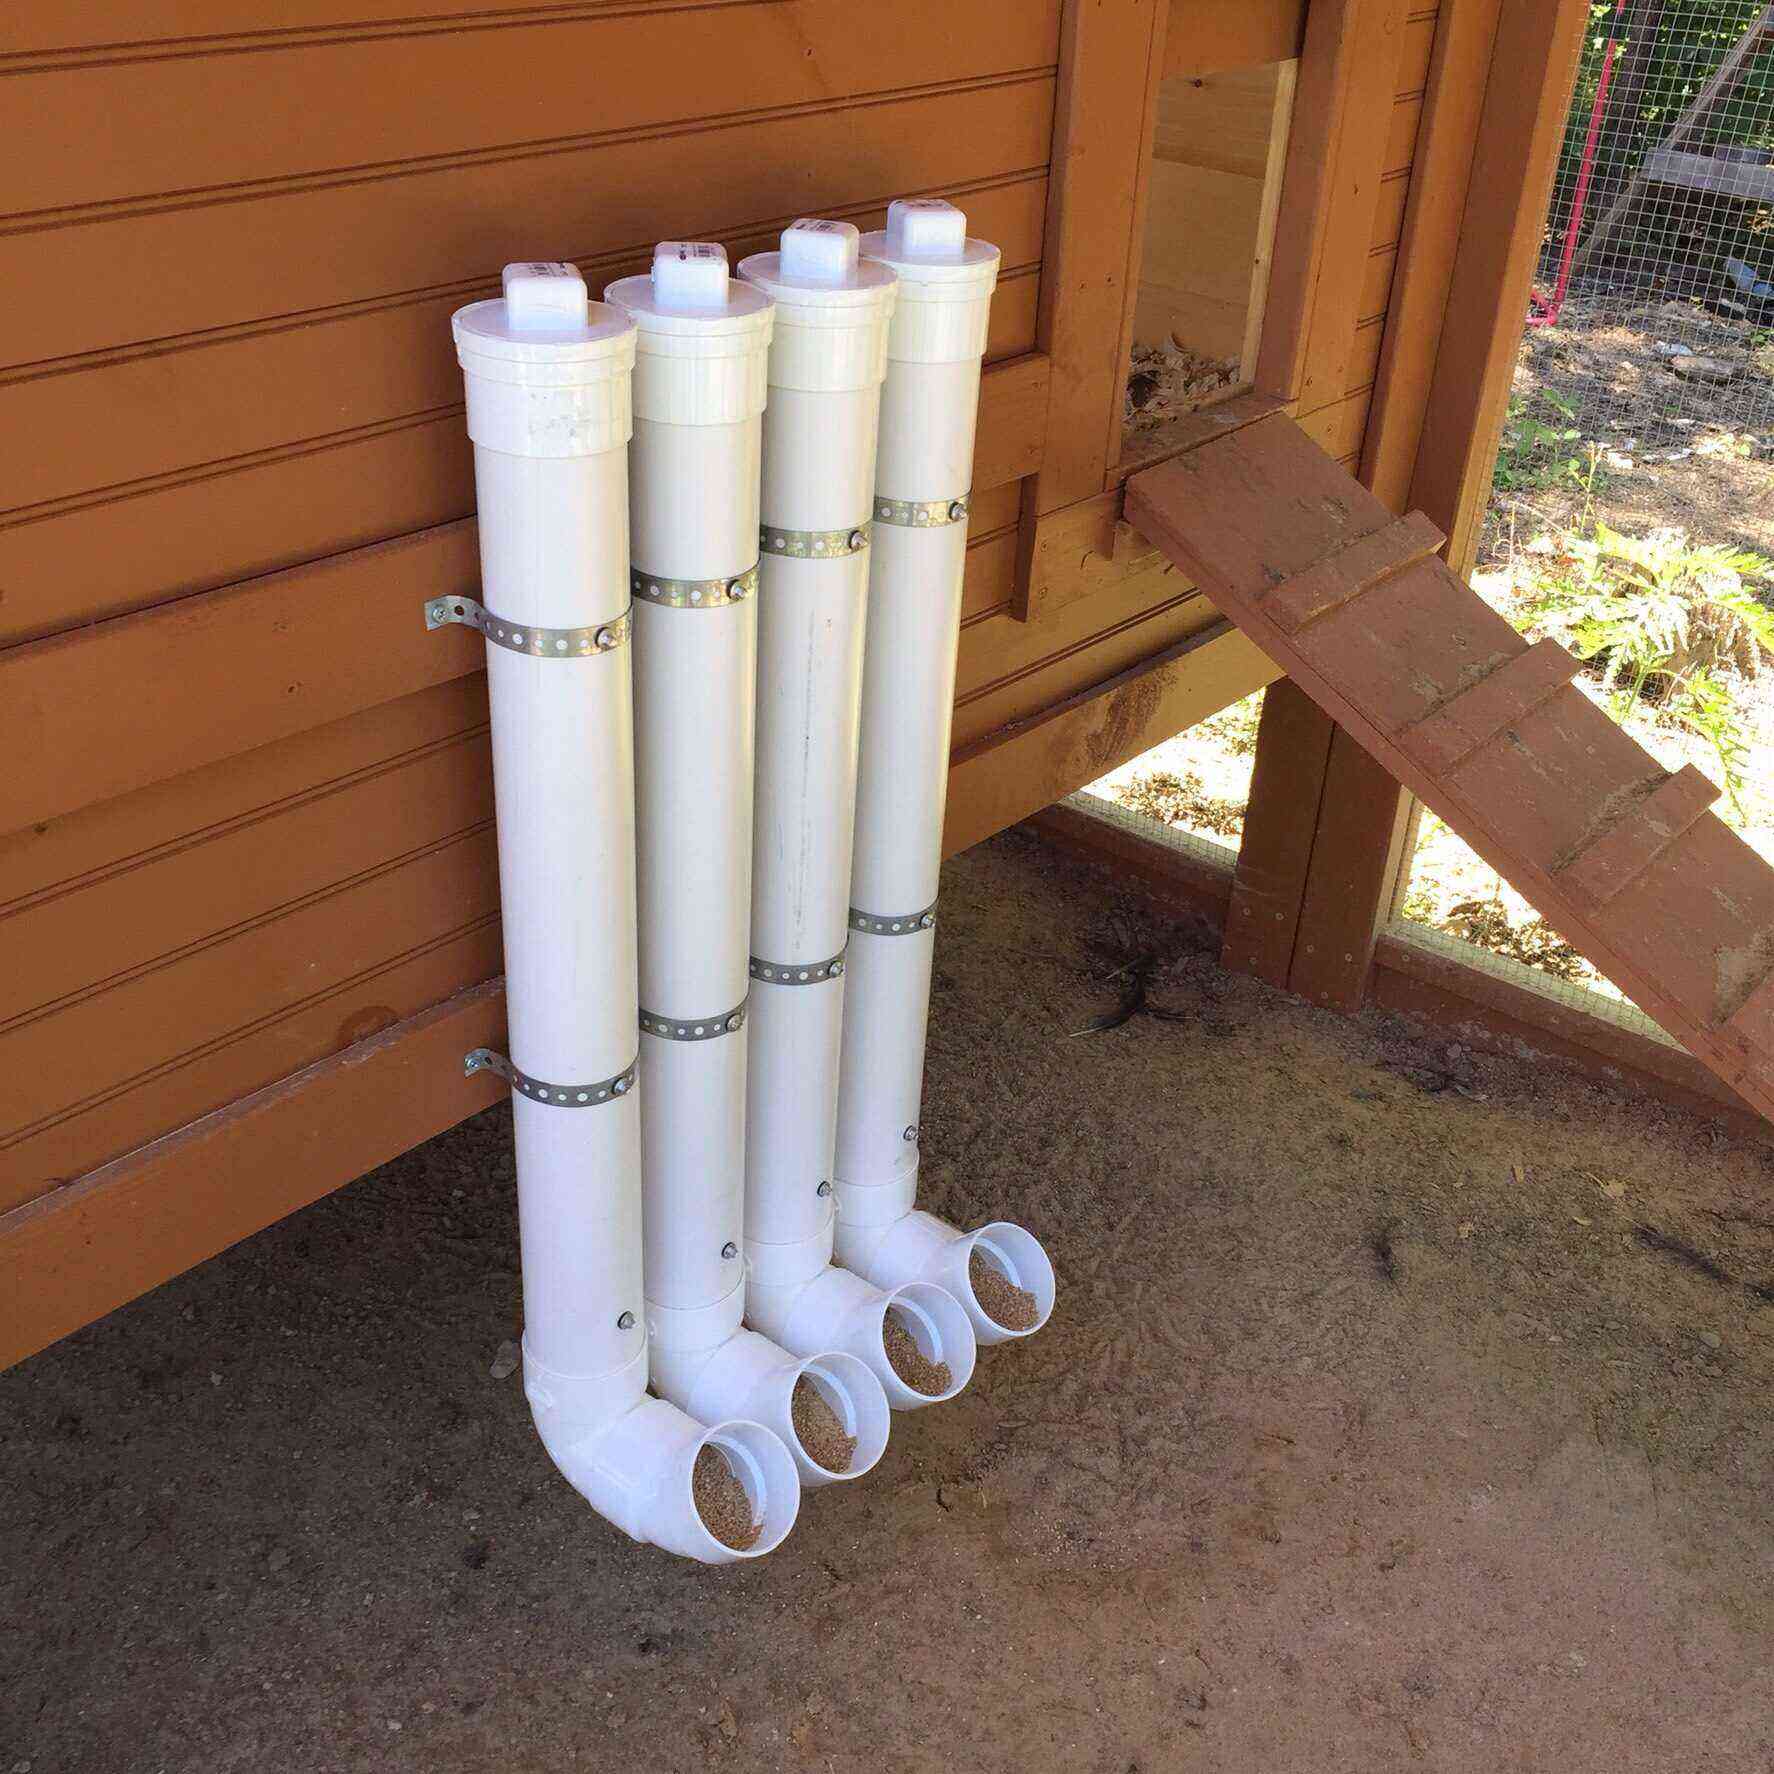 Chicken feeders made of plastic sewer pipes